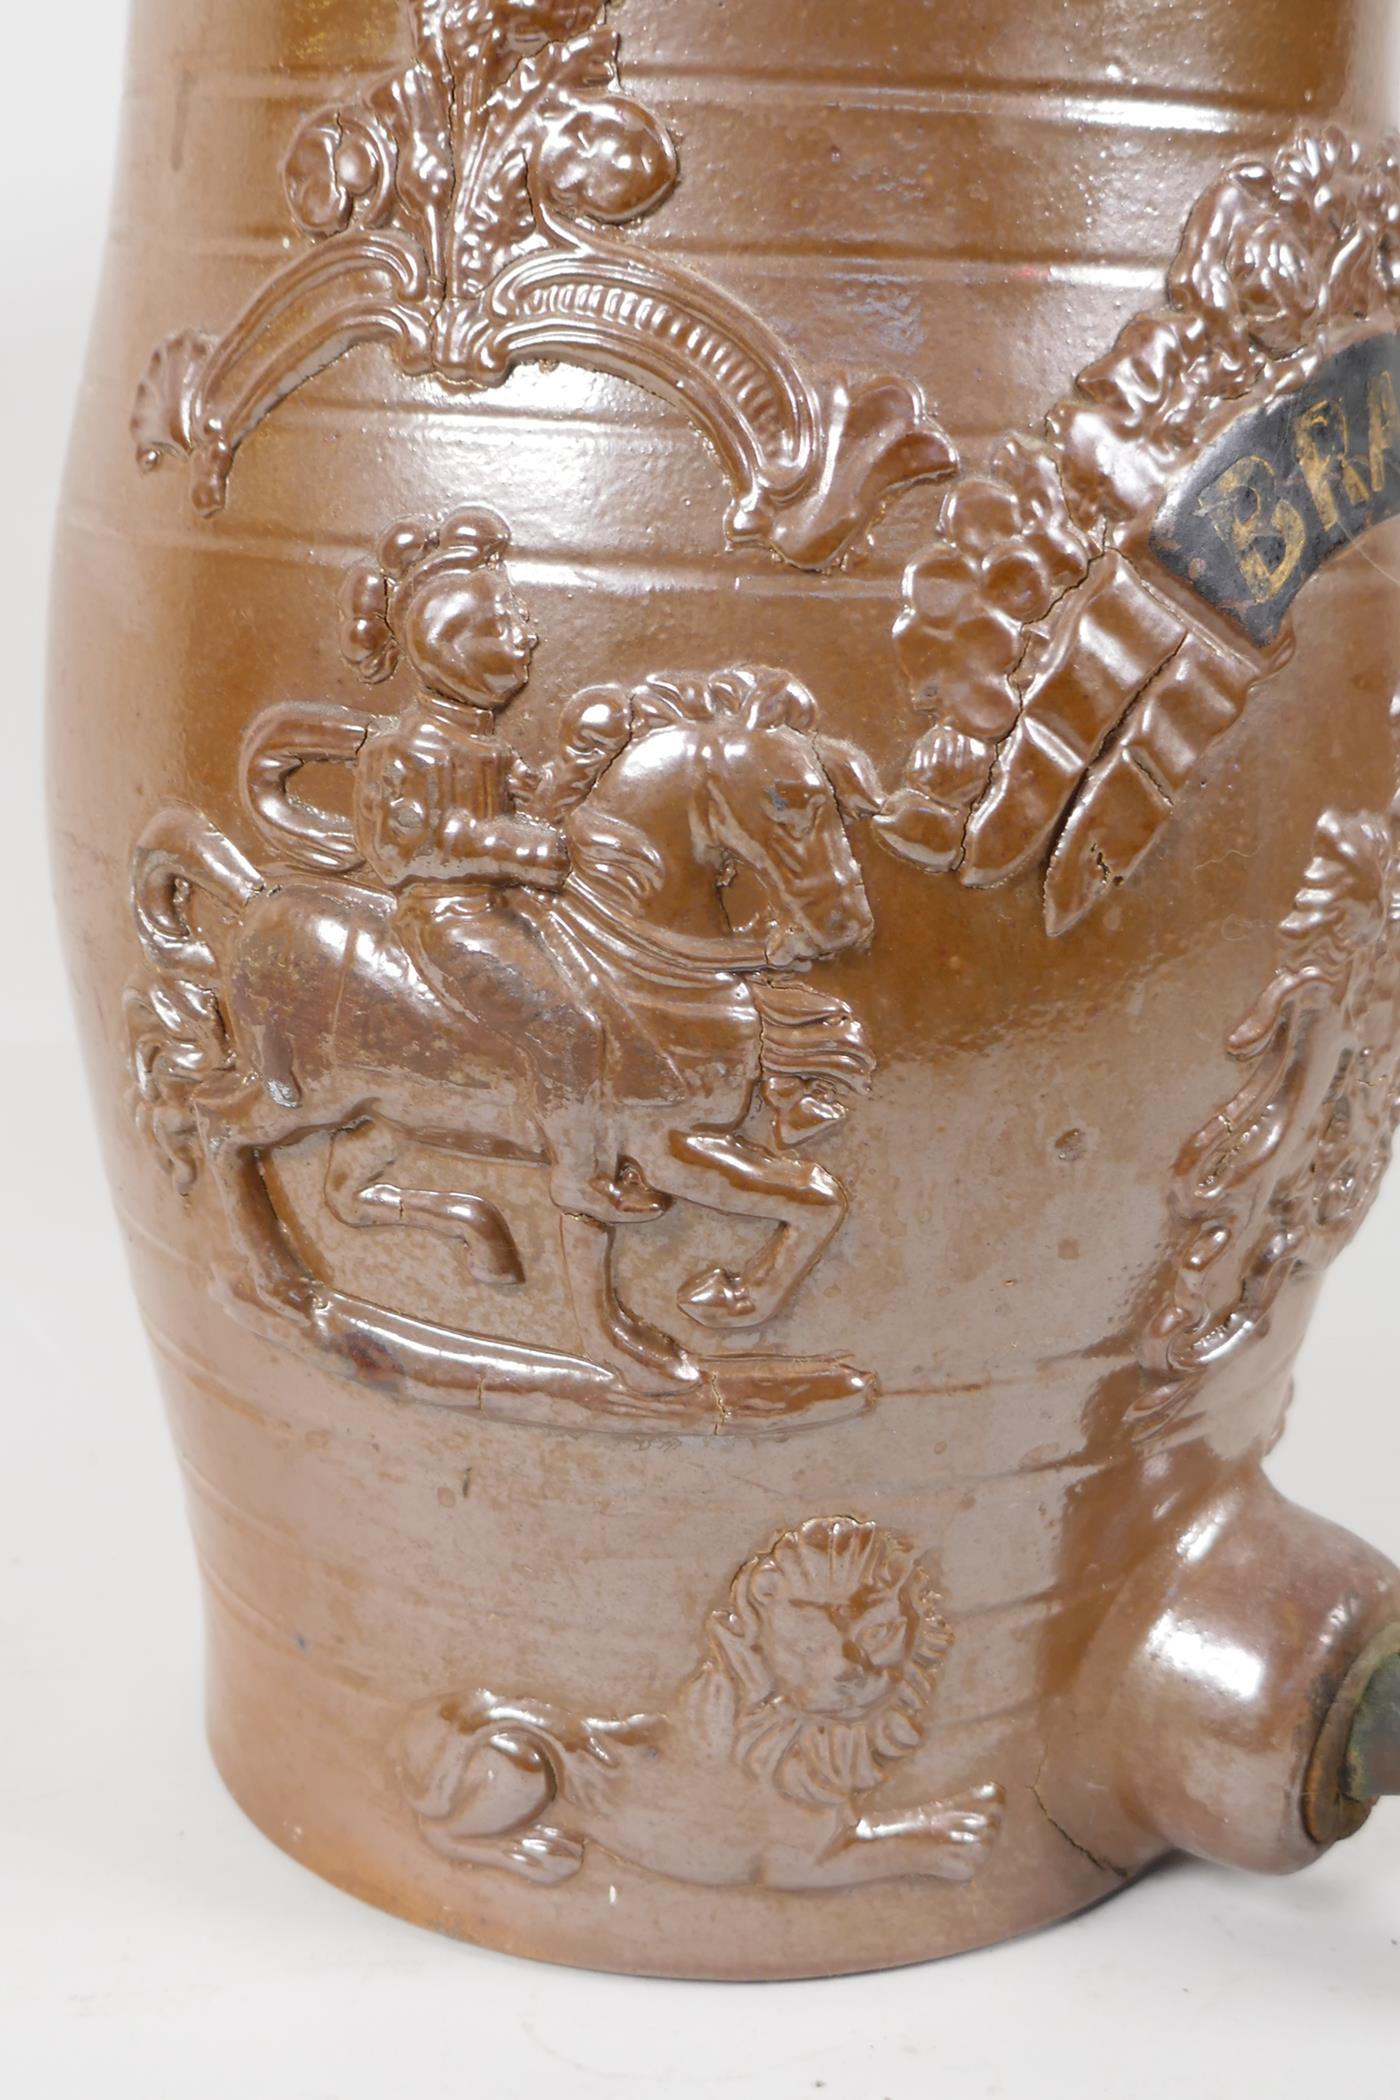 A C19th salt glazed stoneware brandy barrell, embossed with figures of knights on horseback, lions - Image 3 of 4